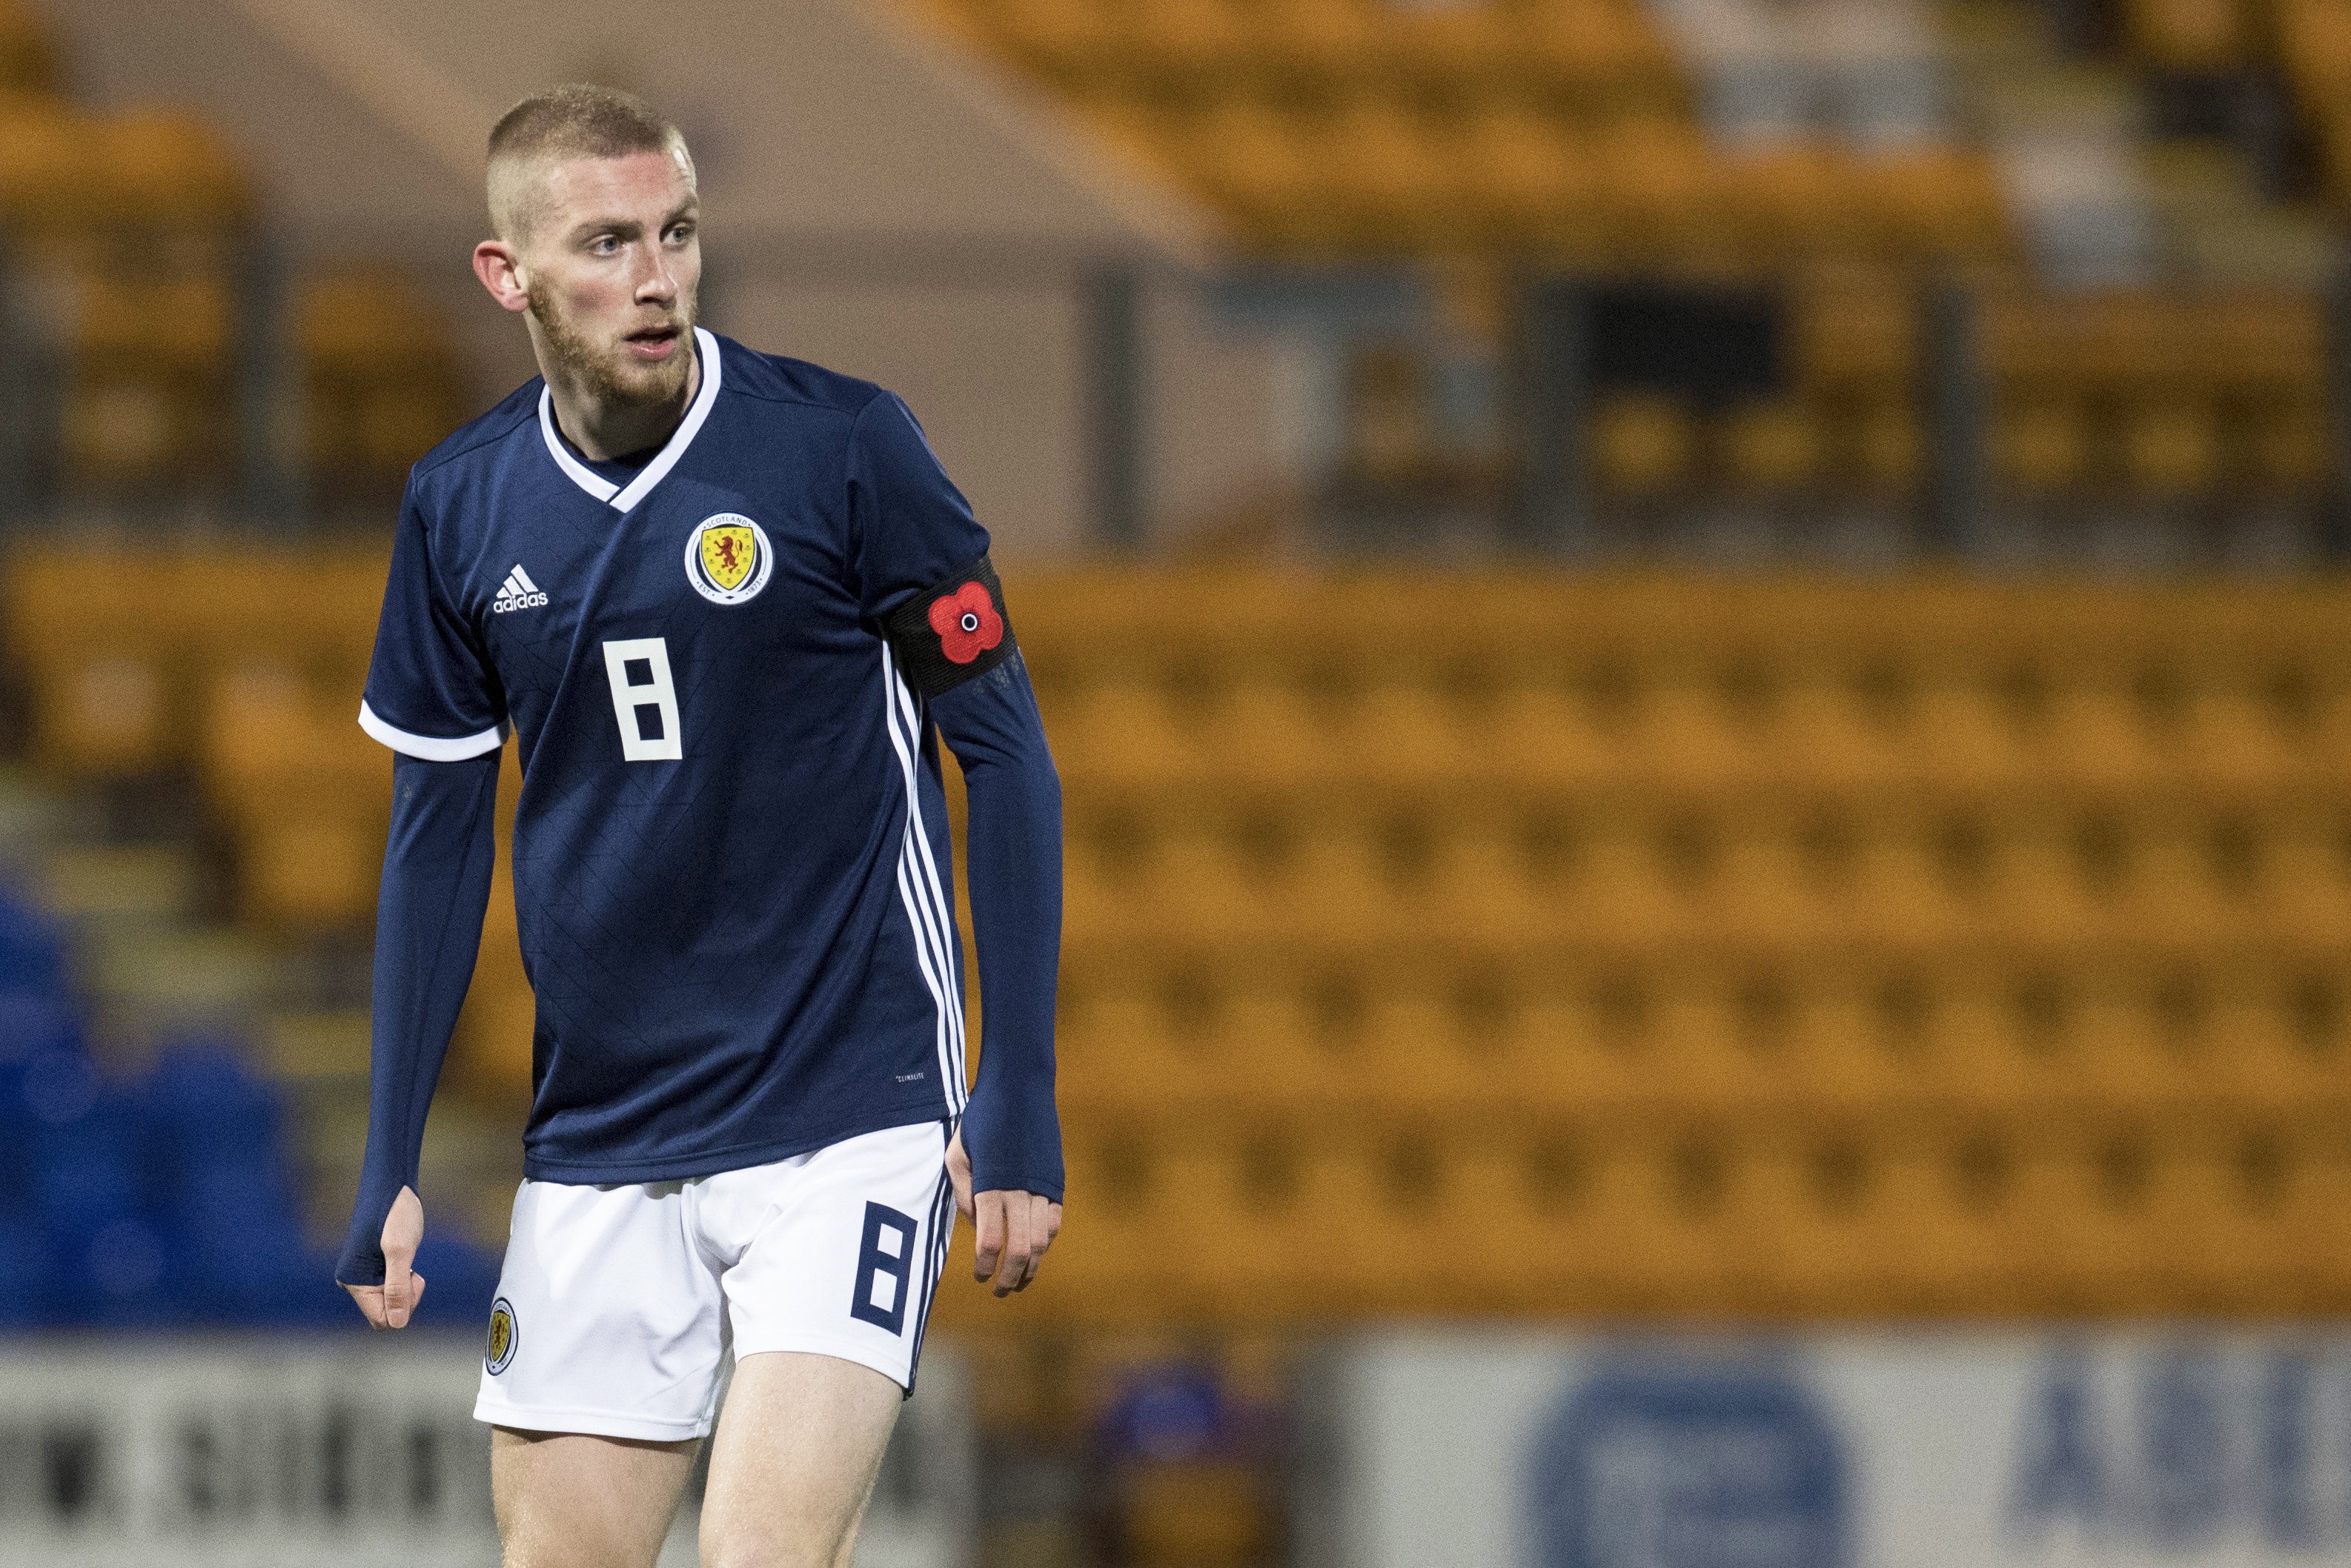 Oli McBurnie has been included in Scotland's senior squad for the first time.